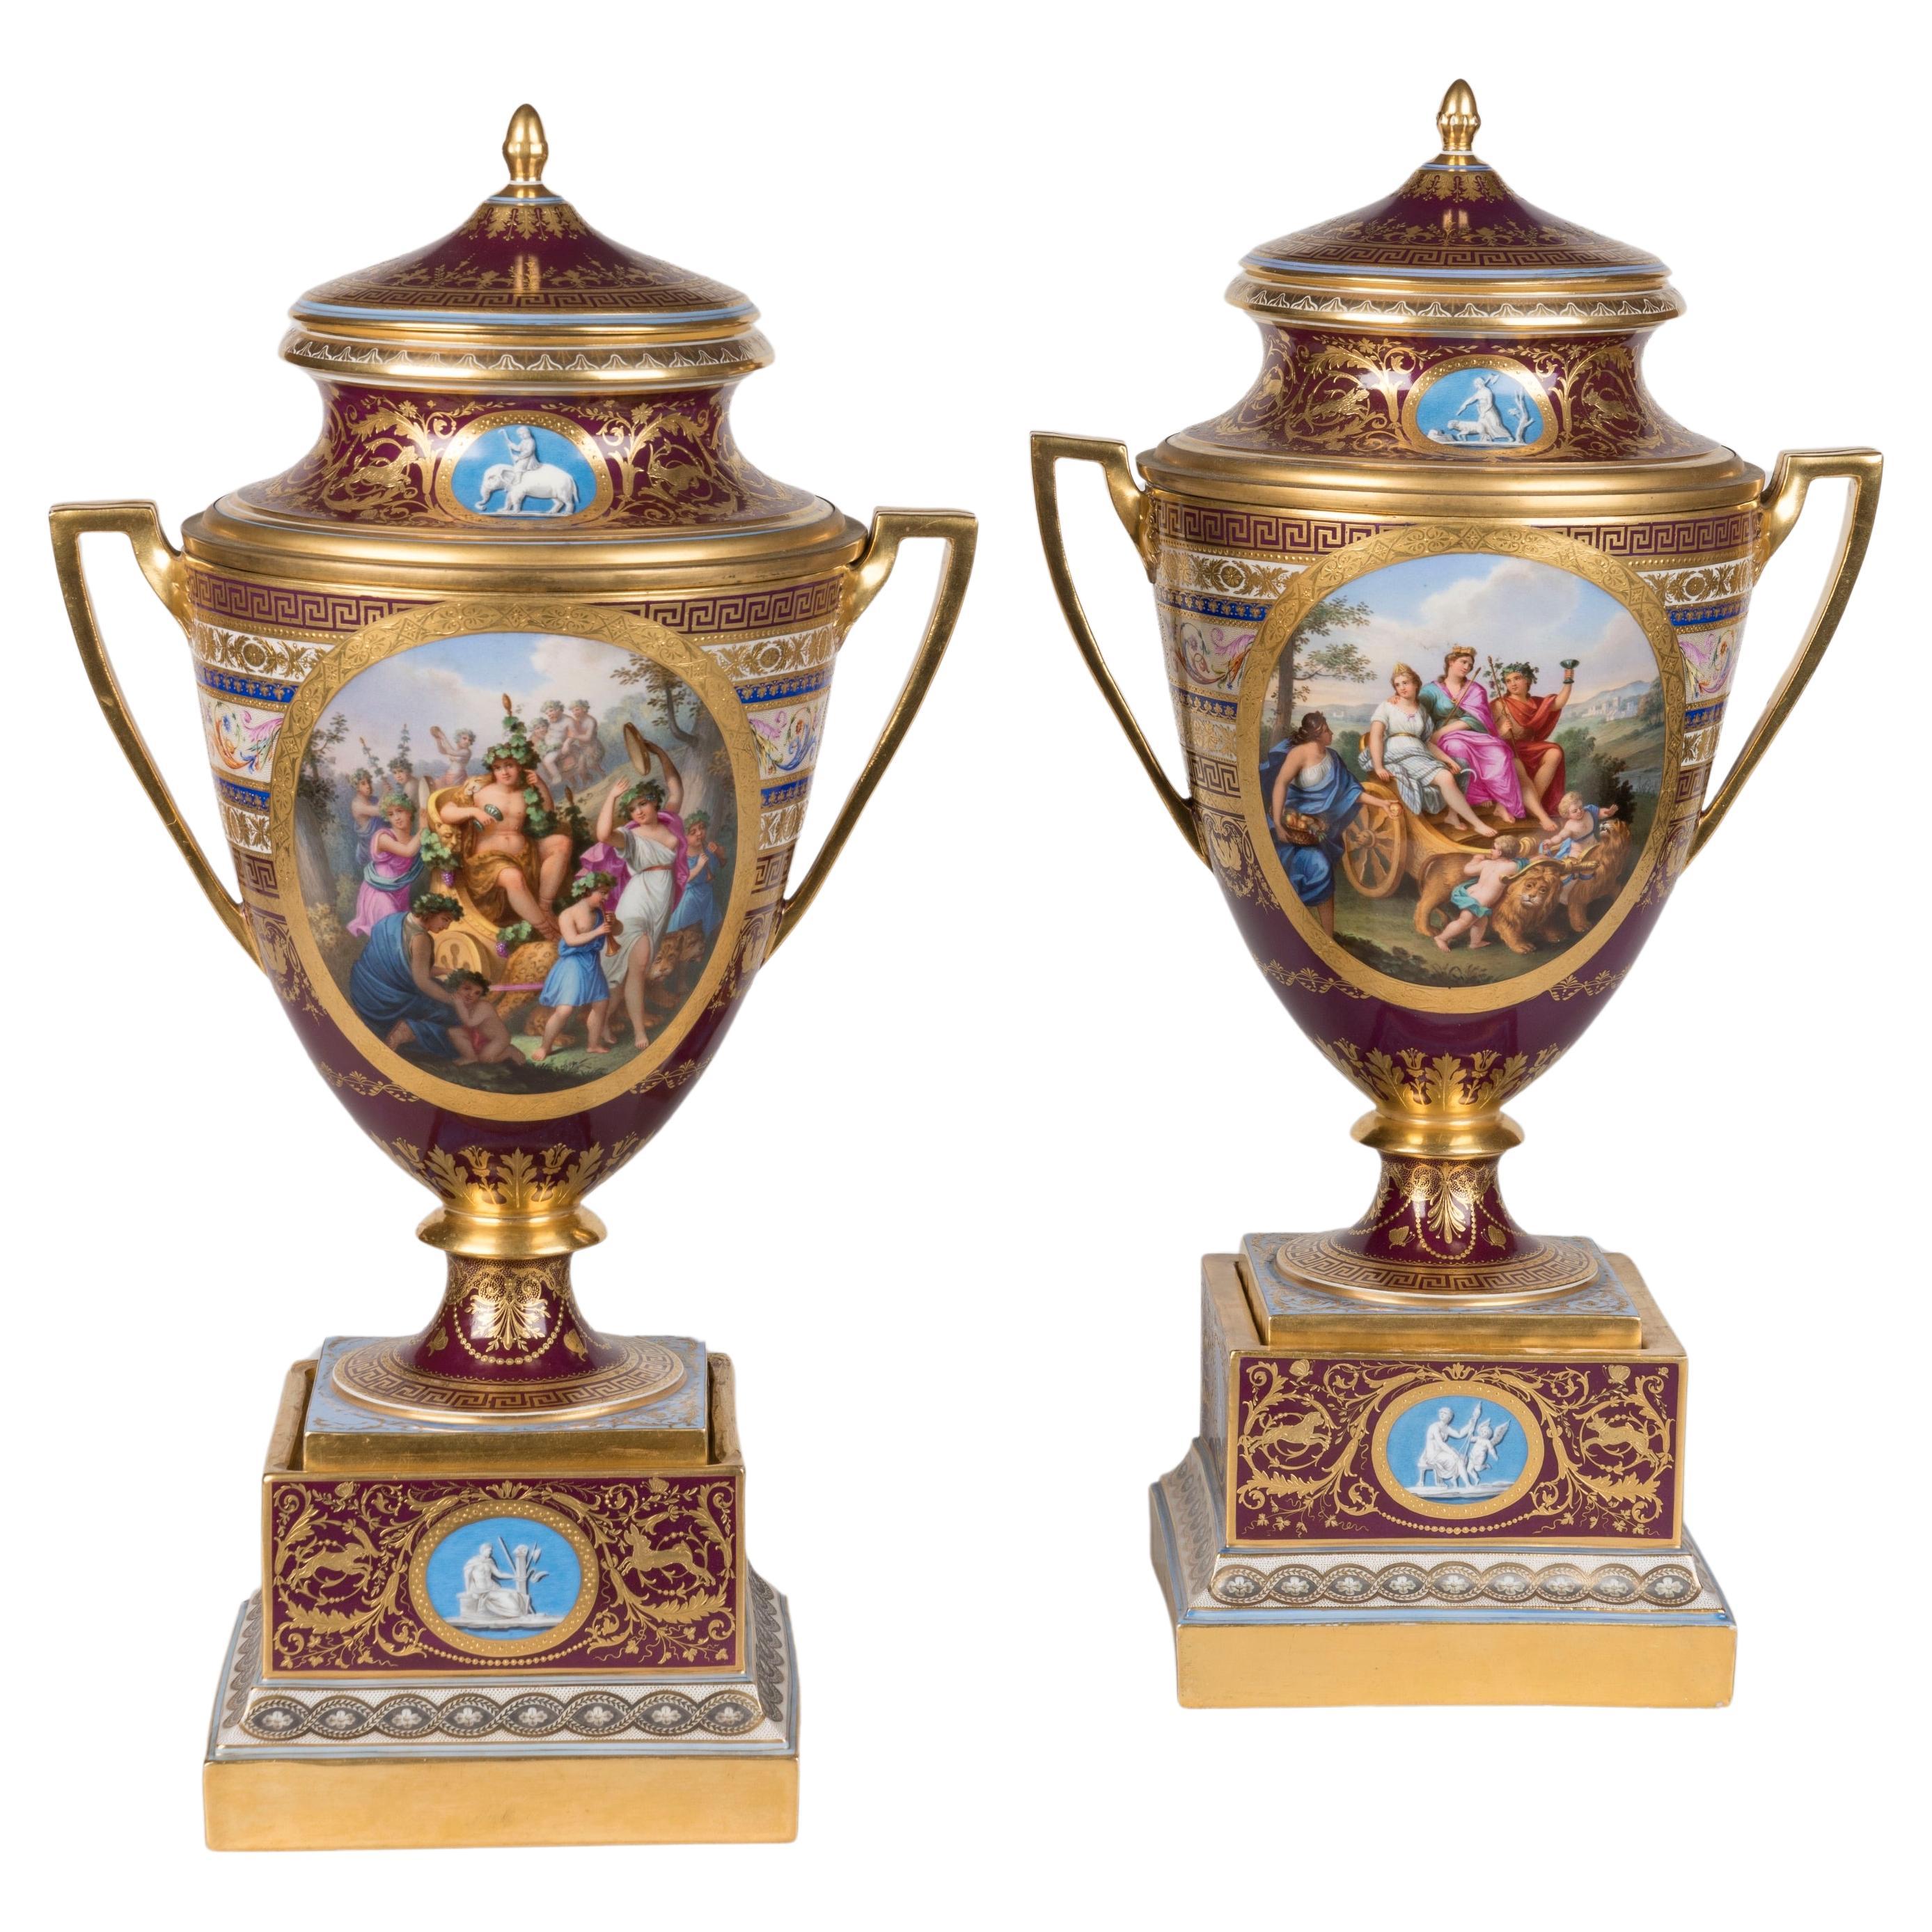 Rare 19th Century Viennese Porcelain Hand-Painted Ice Cream Pail Vases For Sale